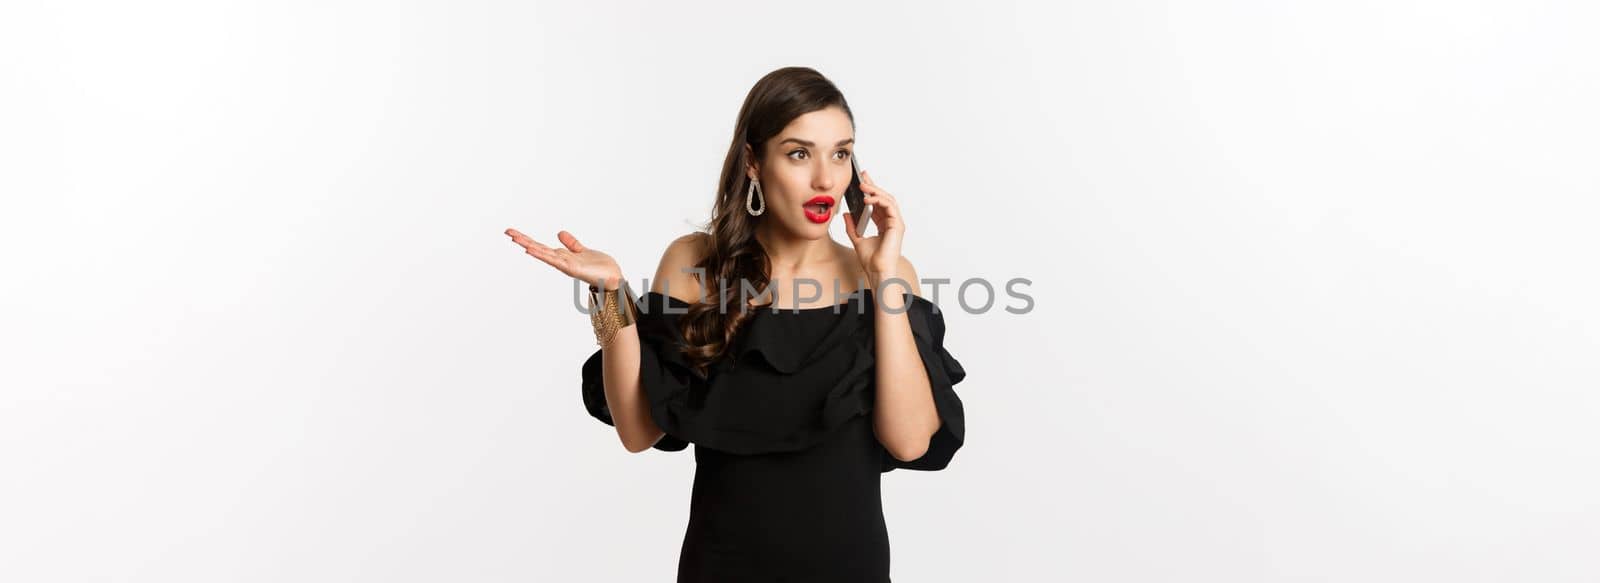 Attractive glamour woman in black dress talking on mobile phone, having conversation and looking surprised, standing over white background.